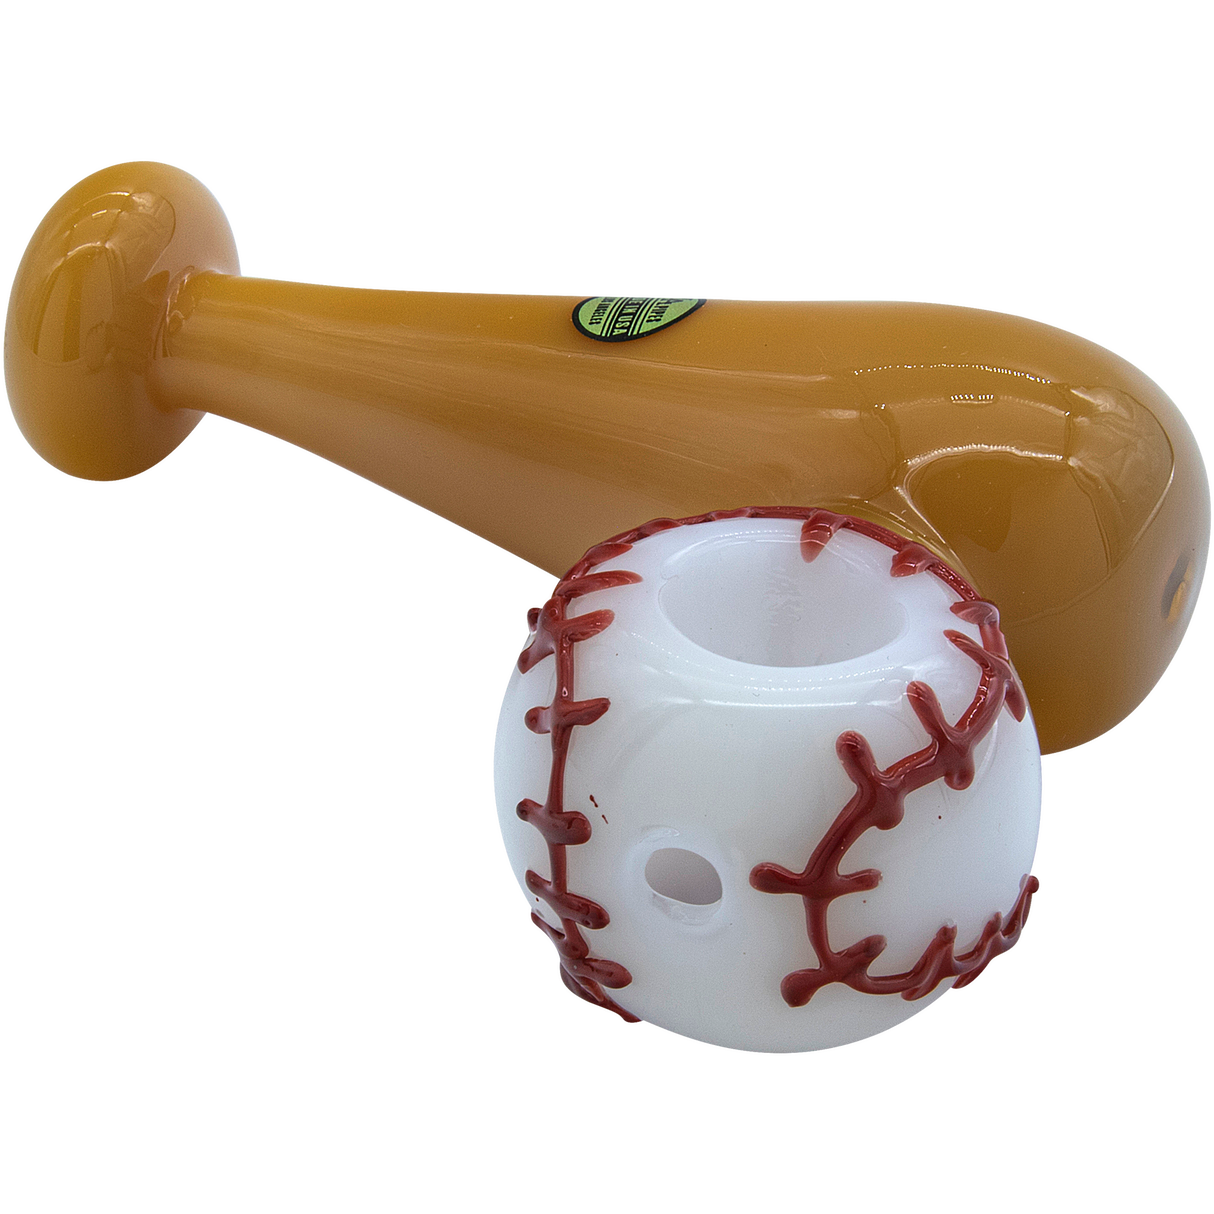 LA Pipes "420 Stretch" Bat & Baseball Glass Pipe for Dry Herbs, Angled Side View